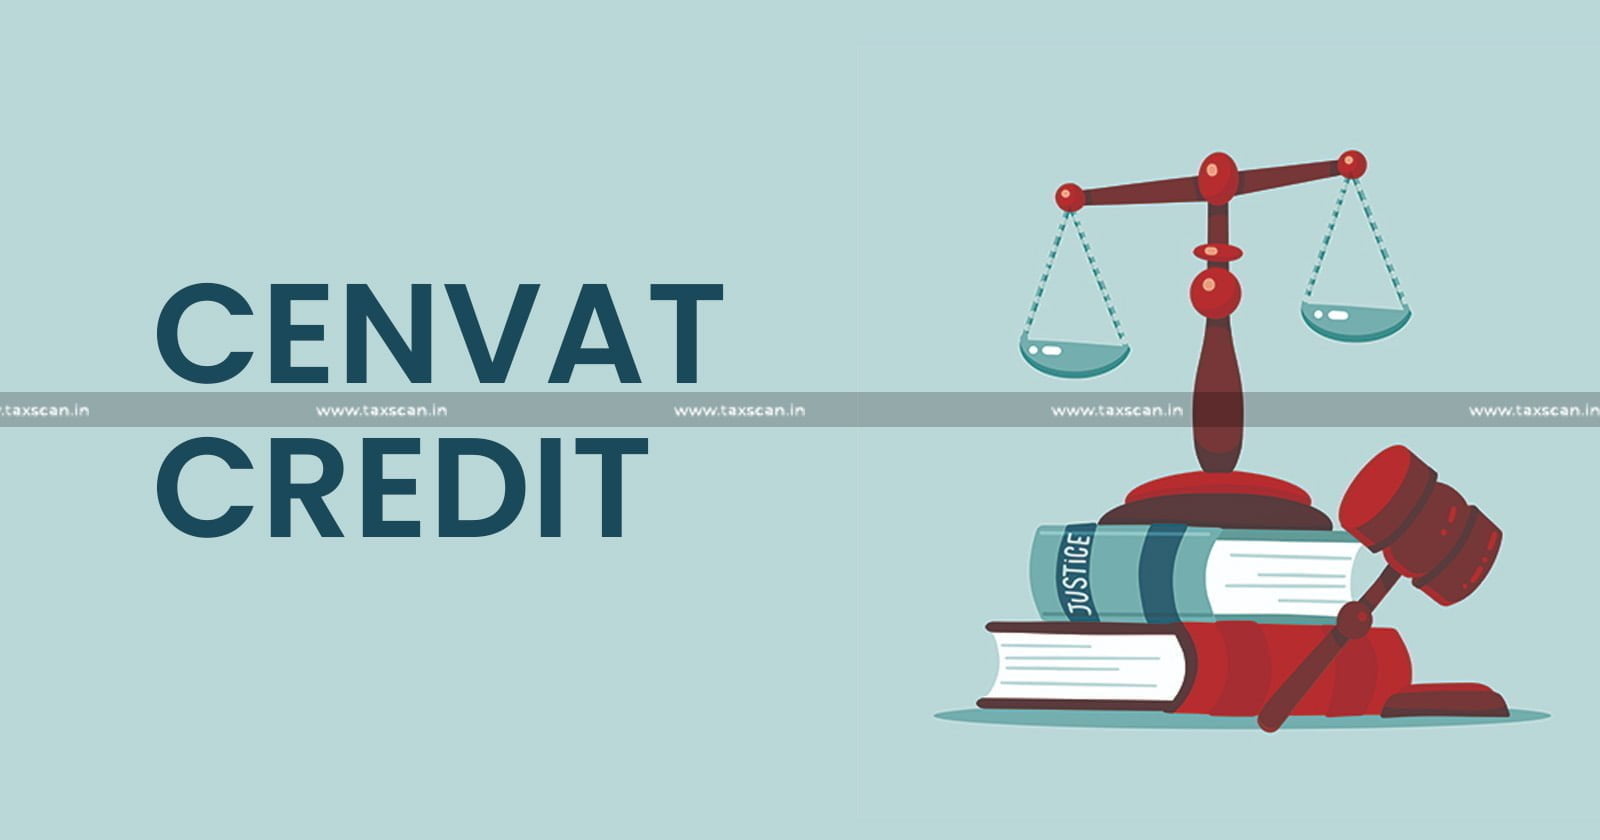 Madras High Court - Cenvat credit - Electricity as input for Cenvat Credit - Cenvat Credit eligibility for electricity - Madras High Court Cenvat Credit ruling - TAXSCAN